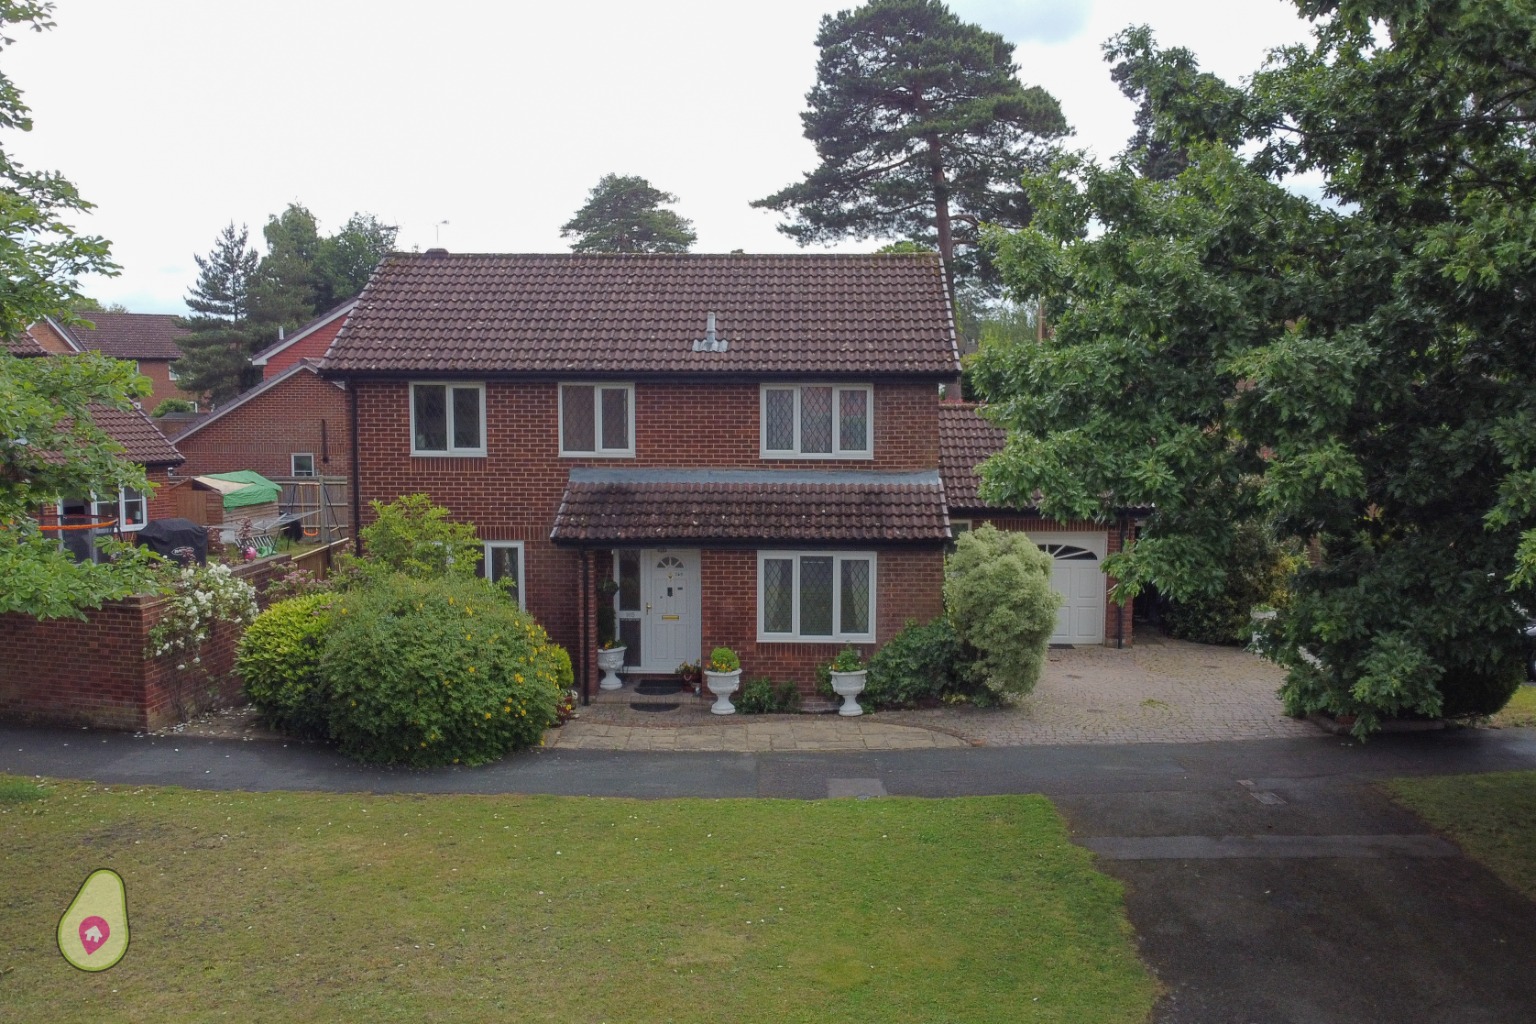 4 bed detached house for sale in Cheylesmore Drive, Camberley, GU16